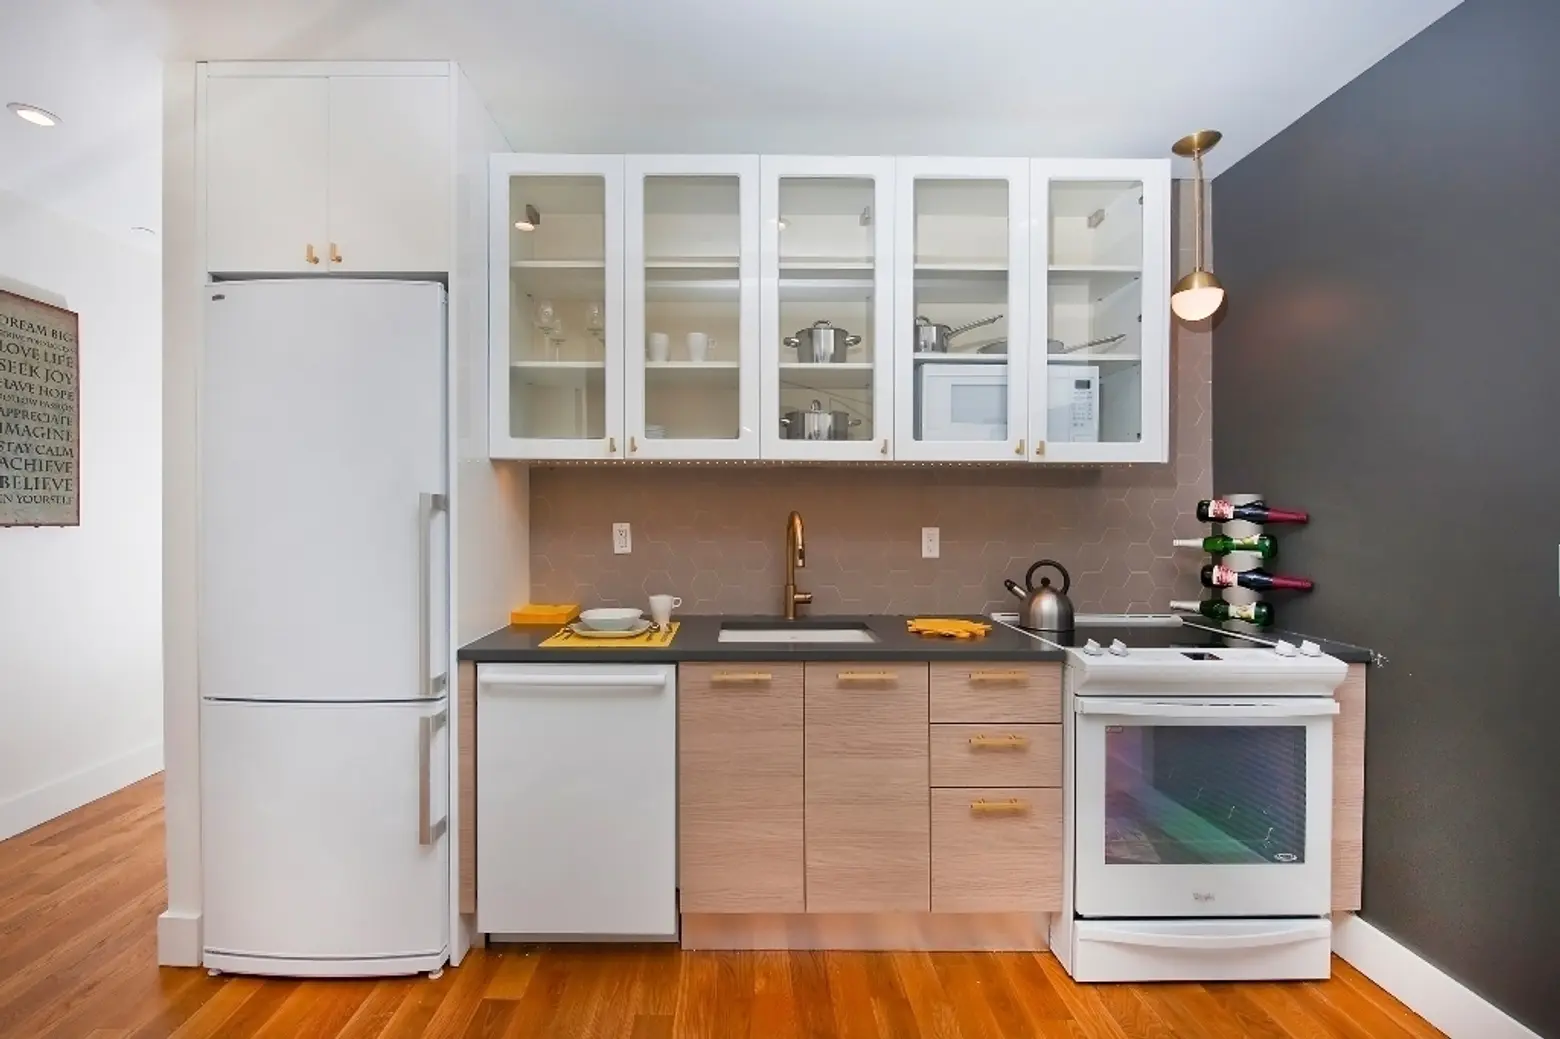 Nine L Train-Adjacent Affordable Apartments Up for Grabs in Williamsburg, From $882